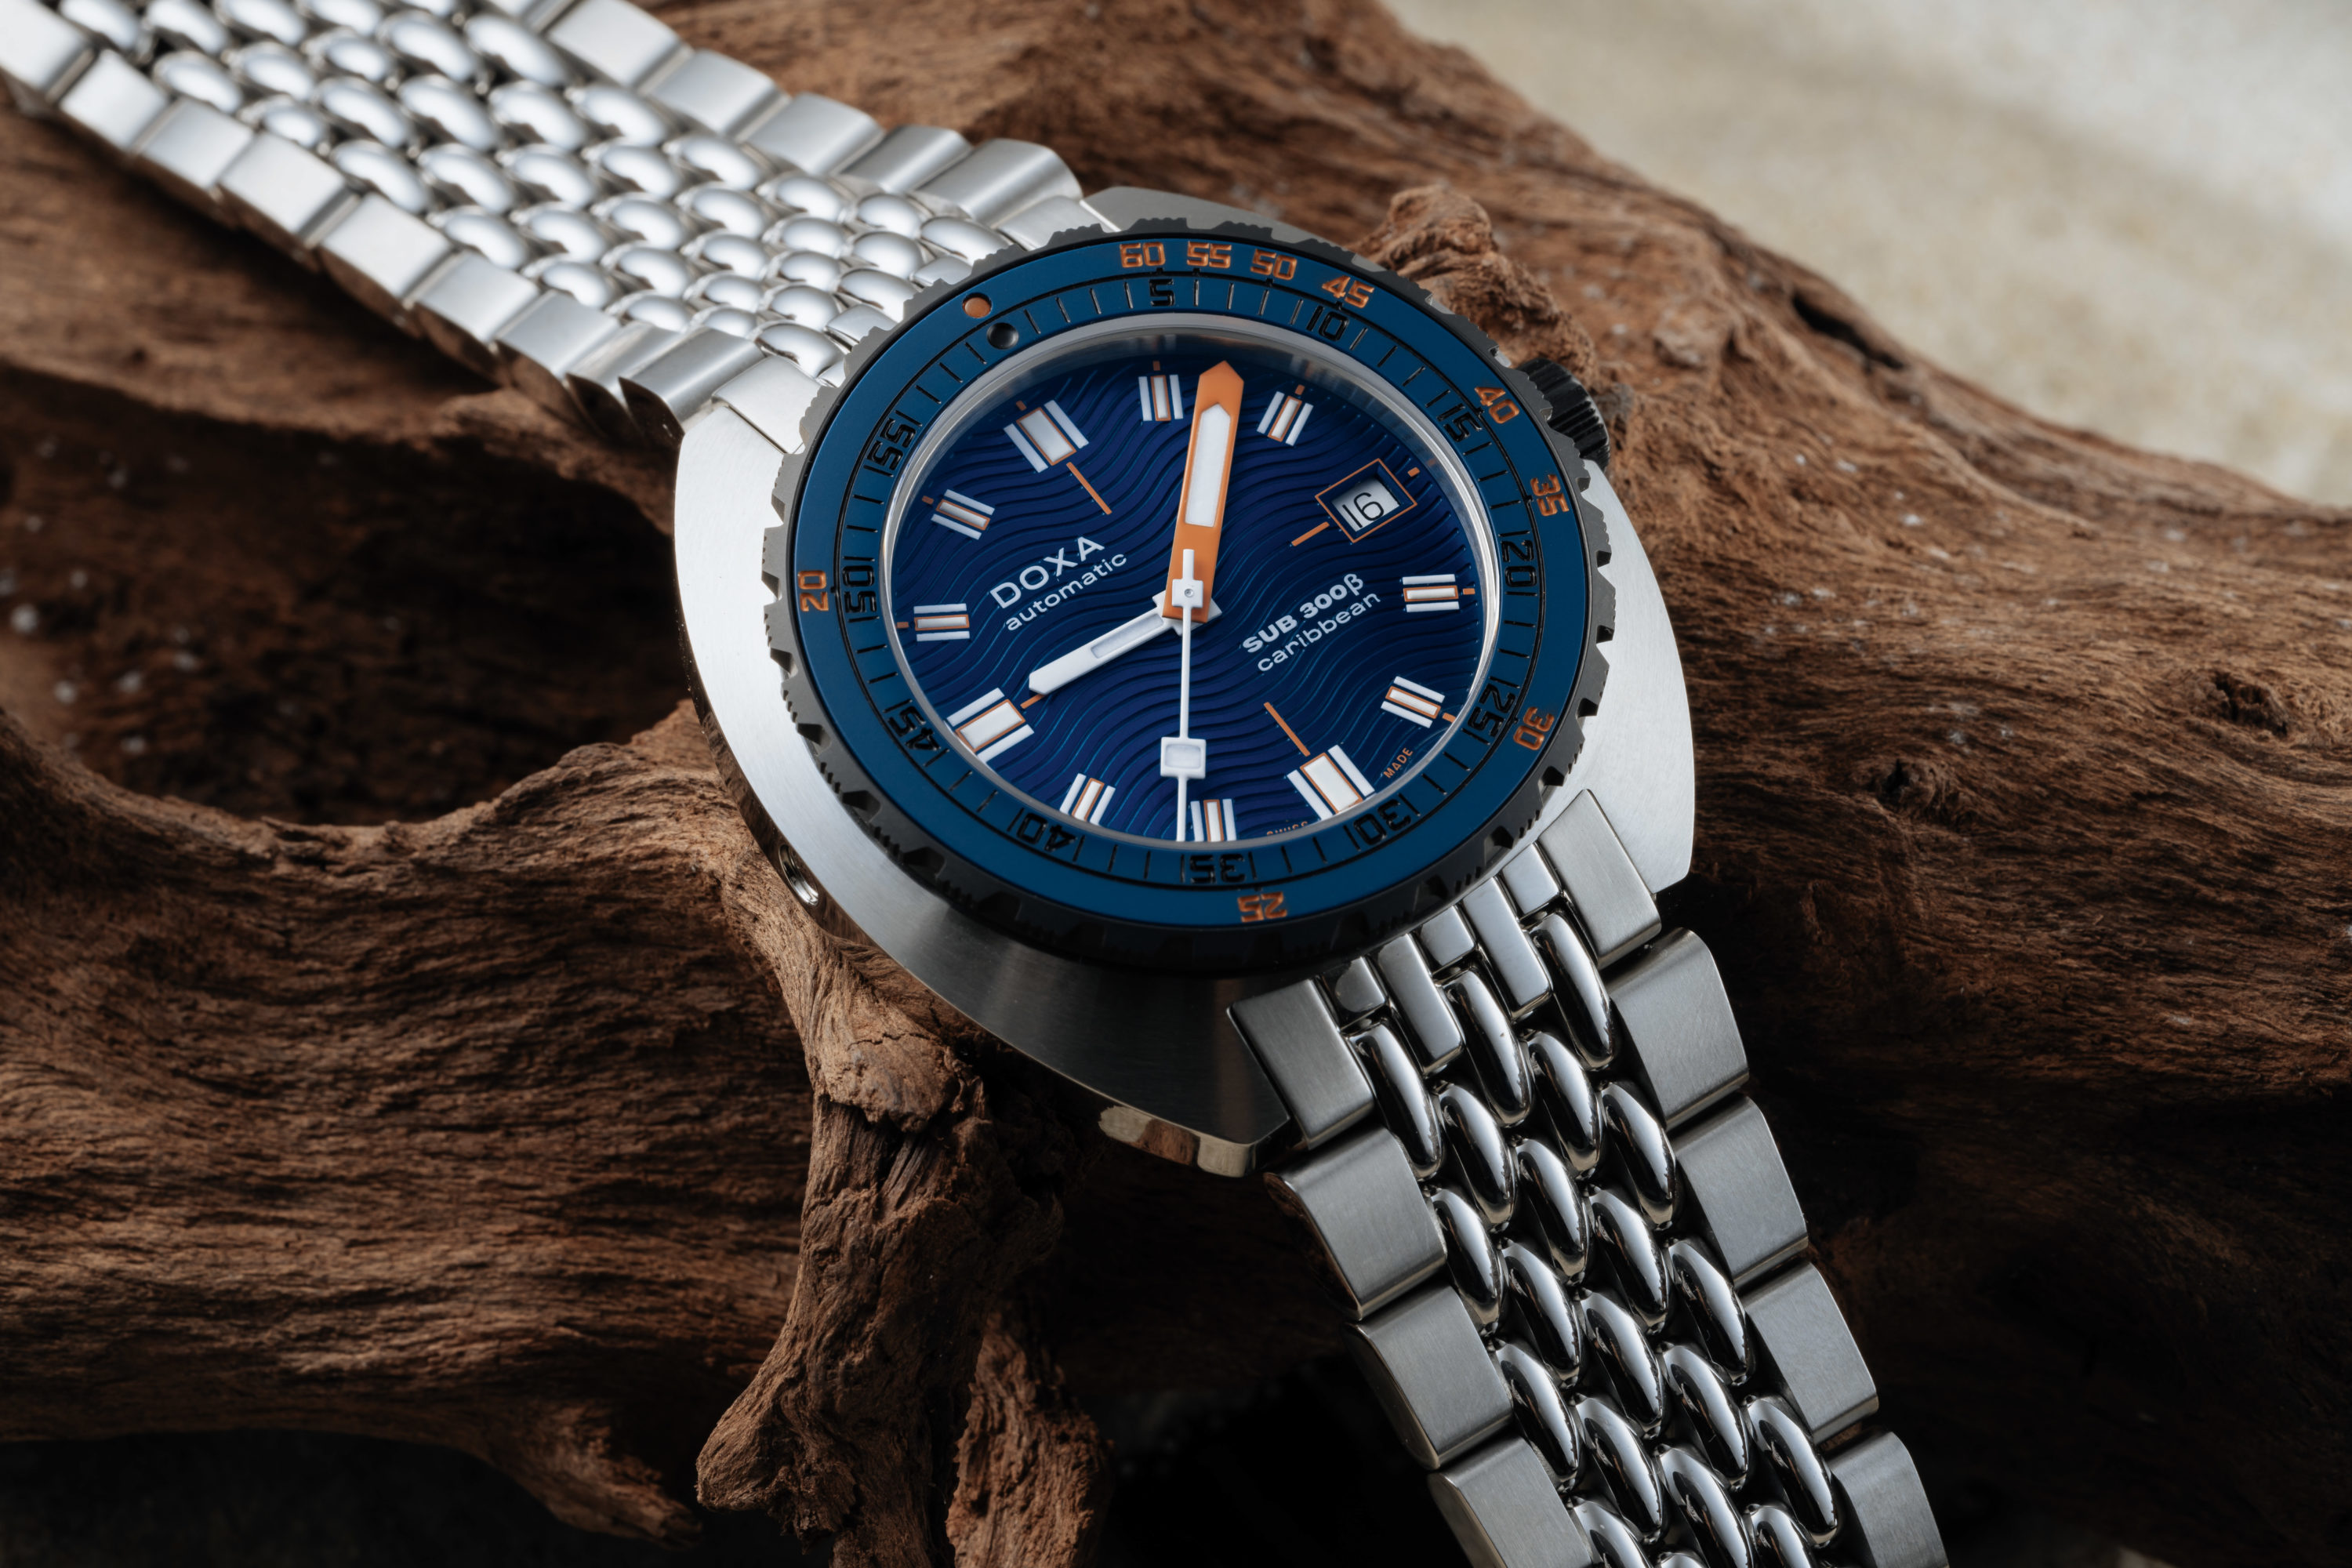 Meet the Doxa SUB 300 Beta Steel with New Colors and a Slimmer Silhouette